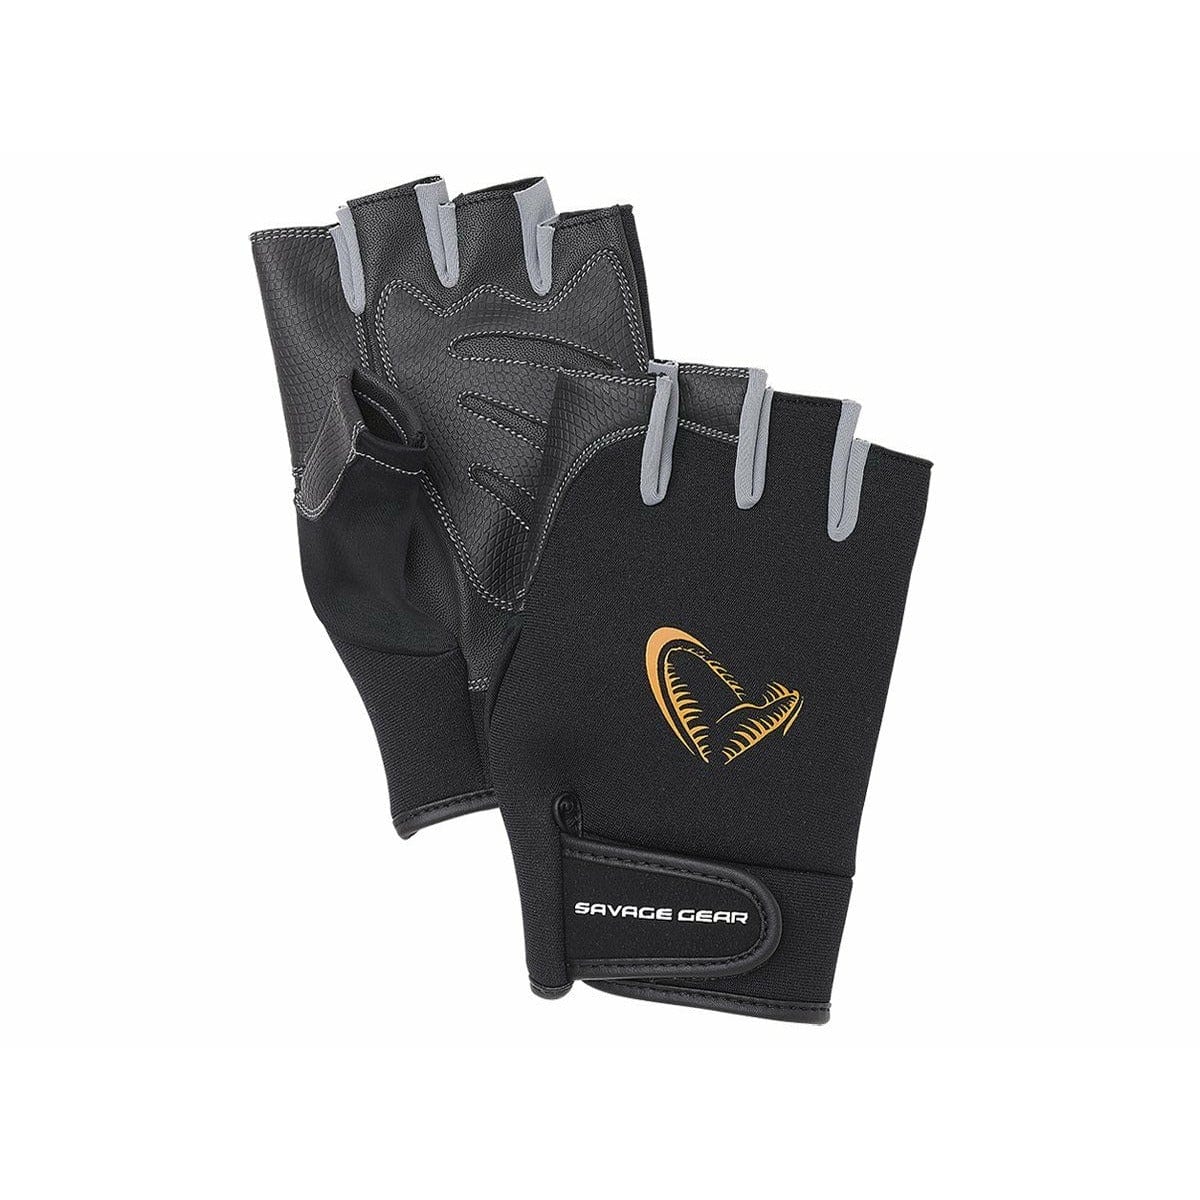 Neoprene Gloves, UK Match Fishing Tackle For True Anglers